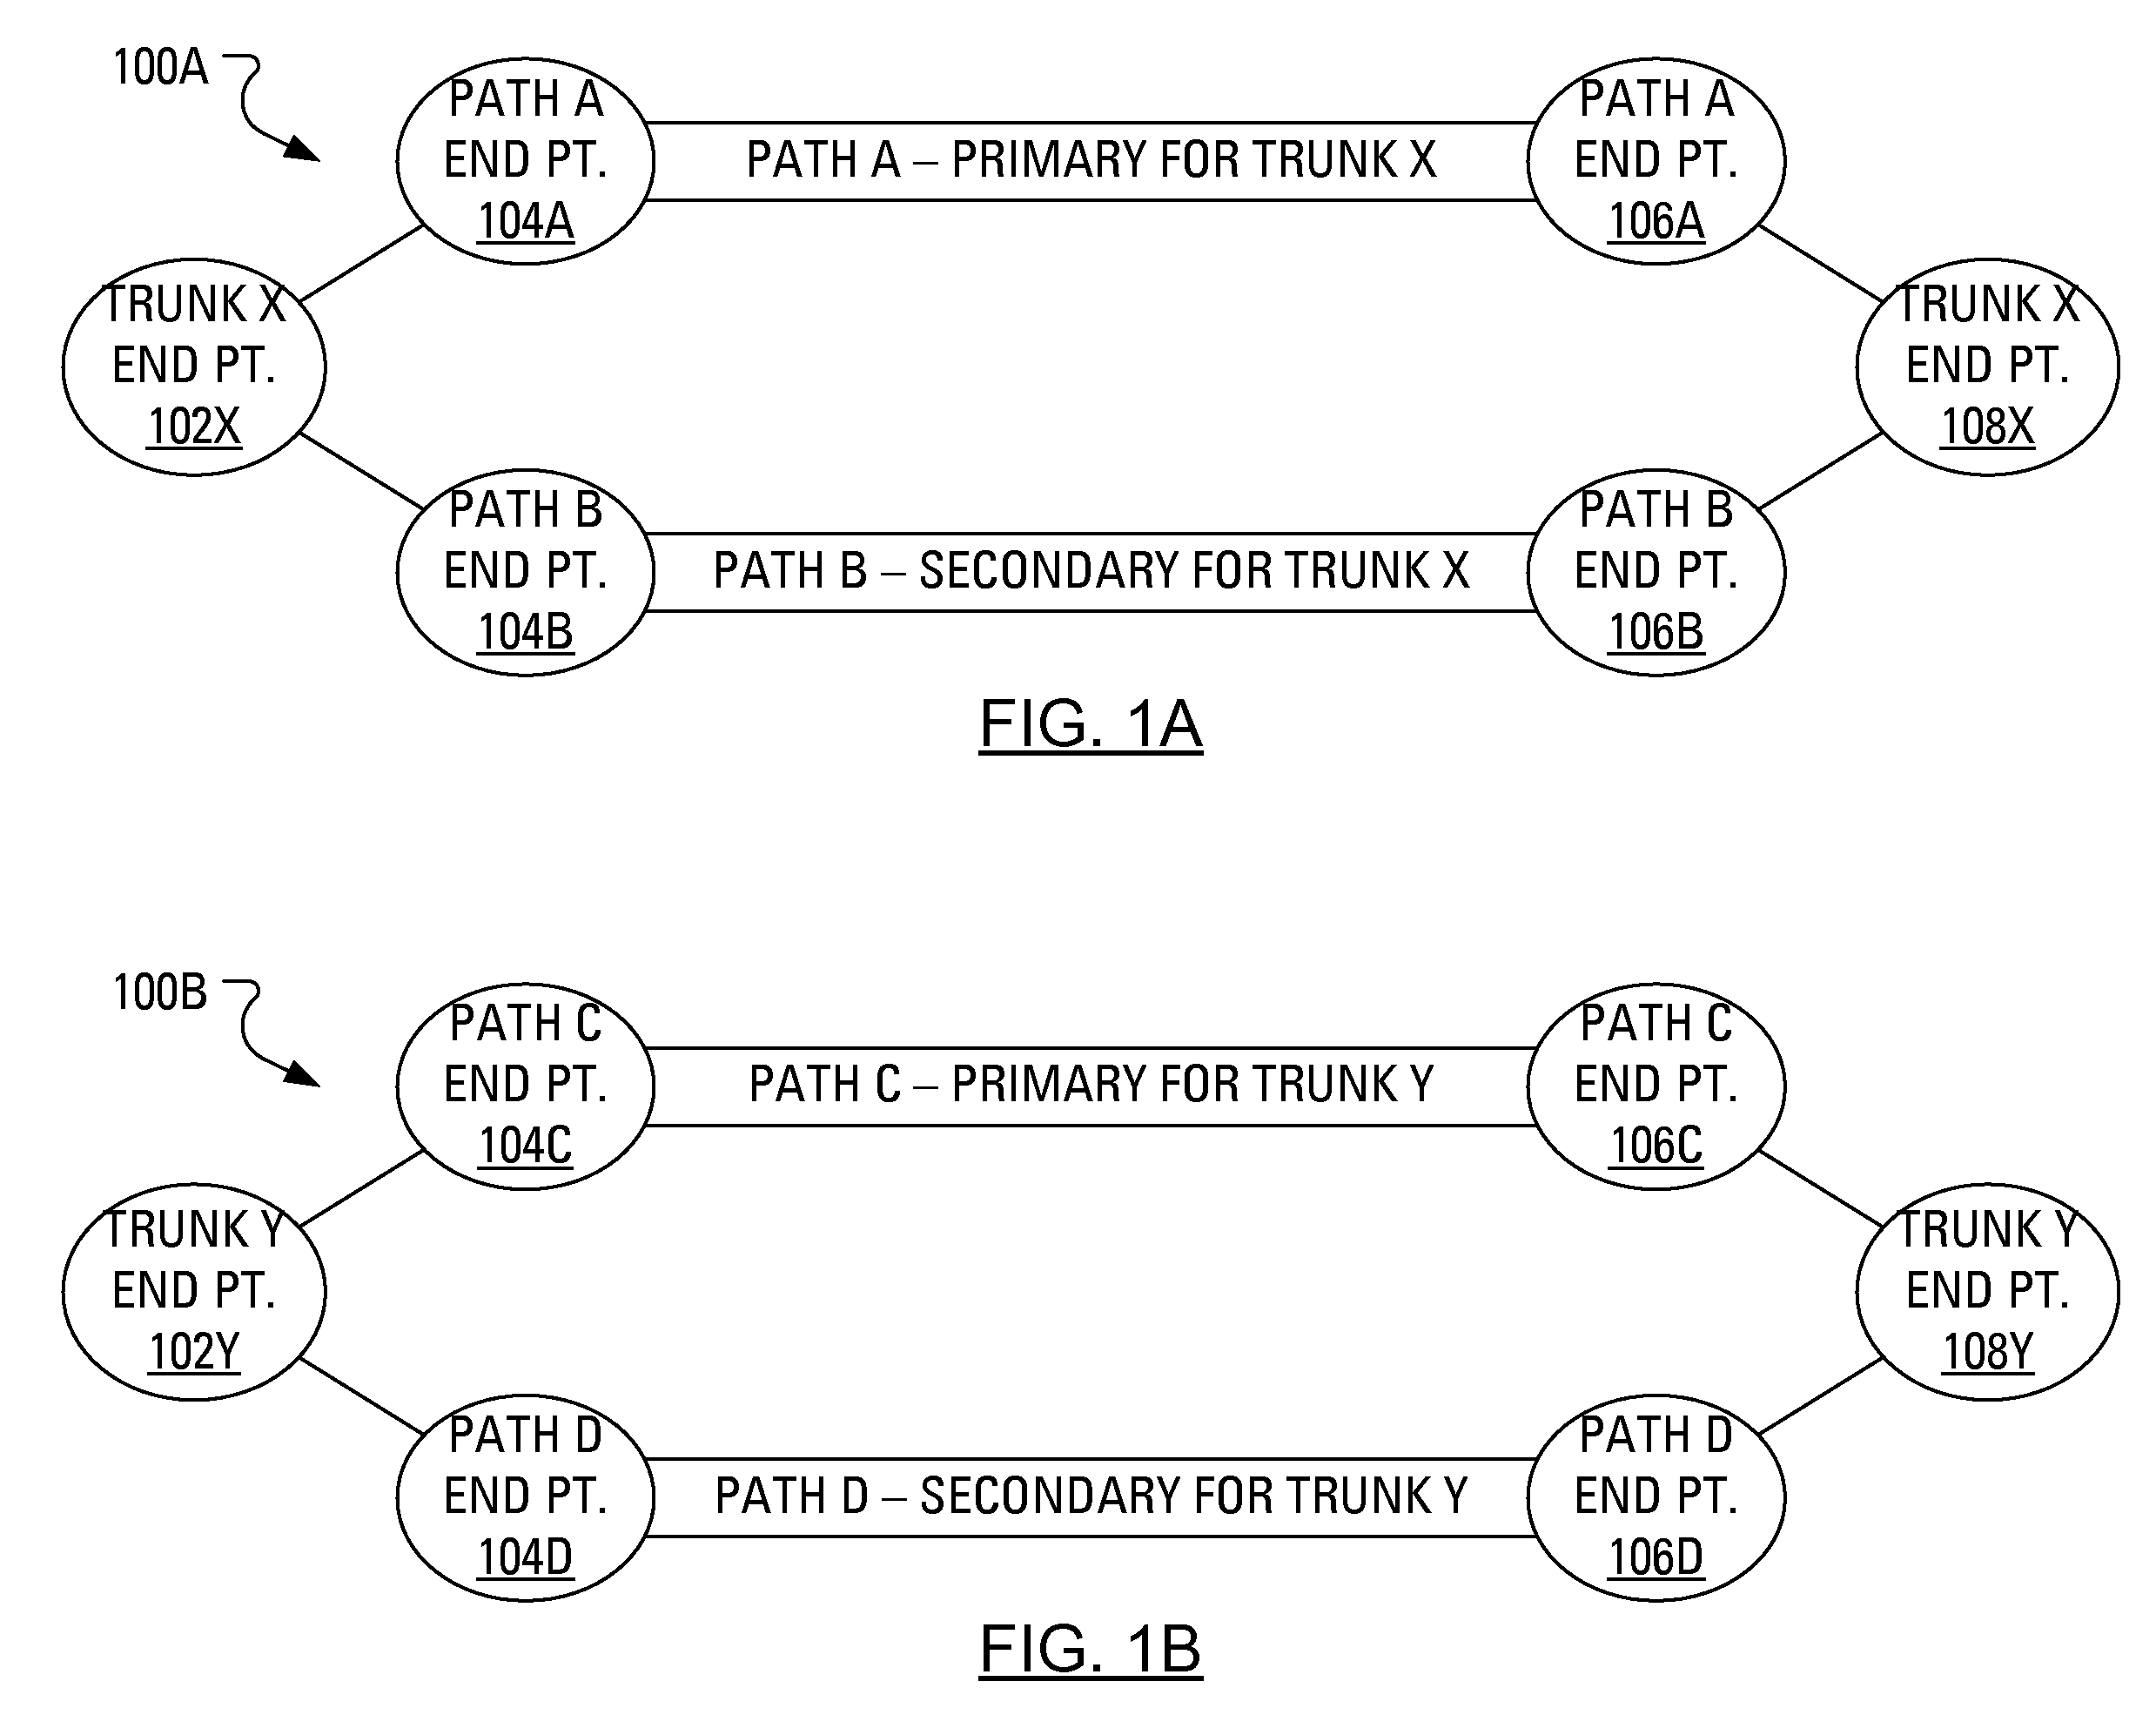 Facilitating automatic protection switching for provider backbone network